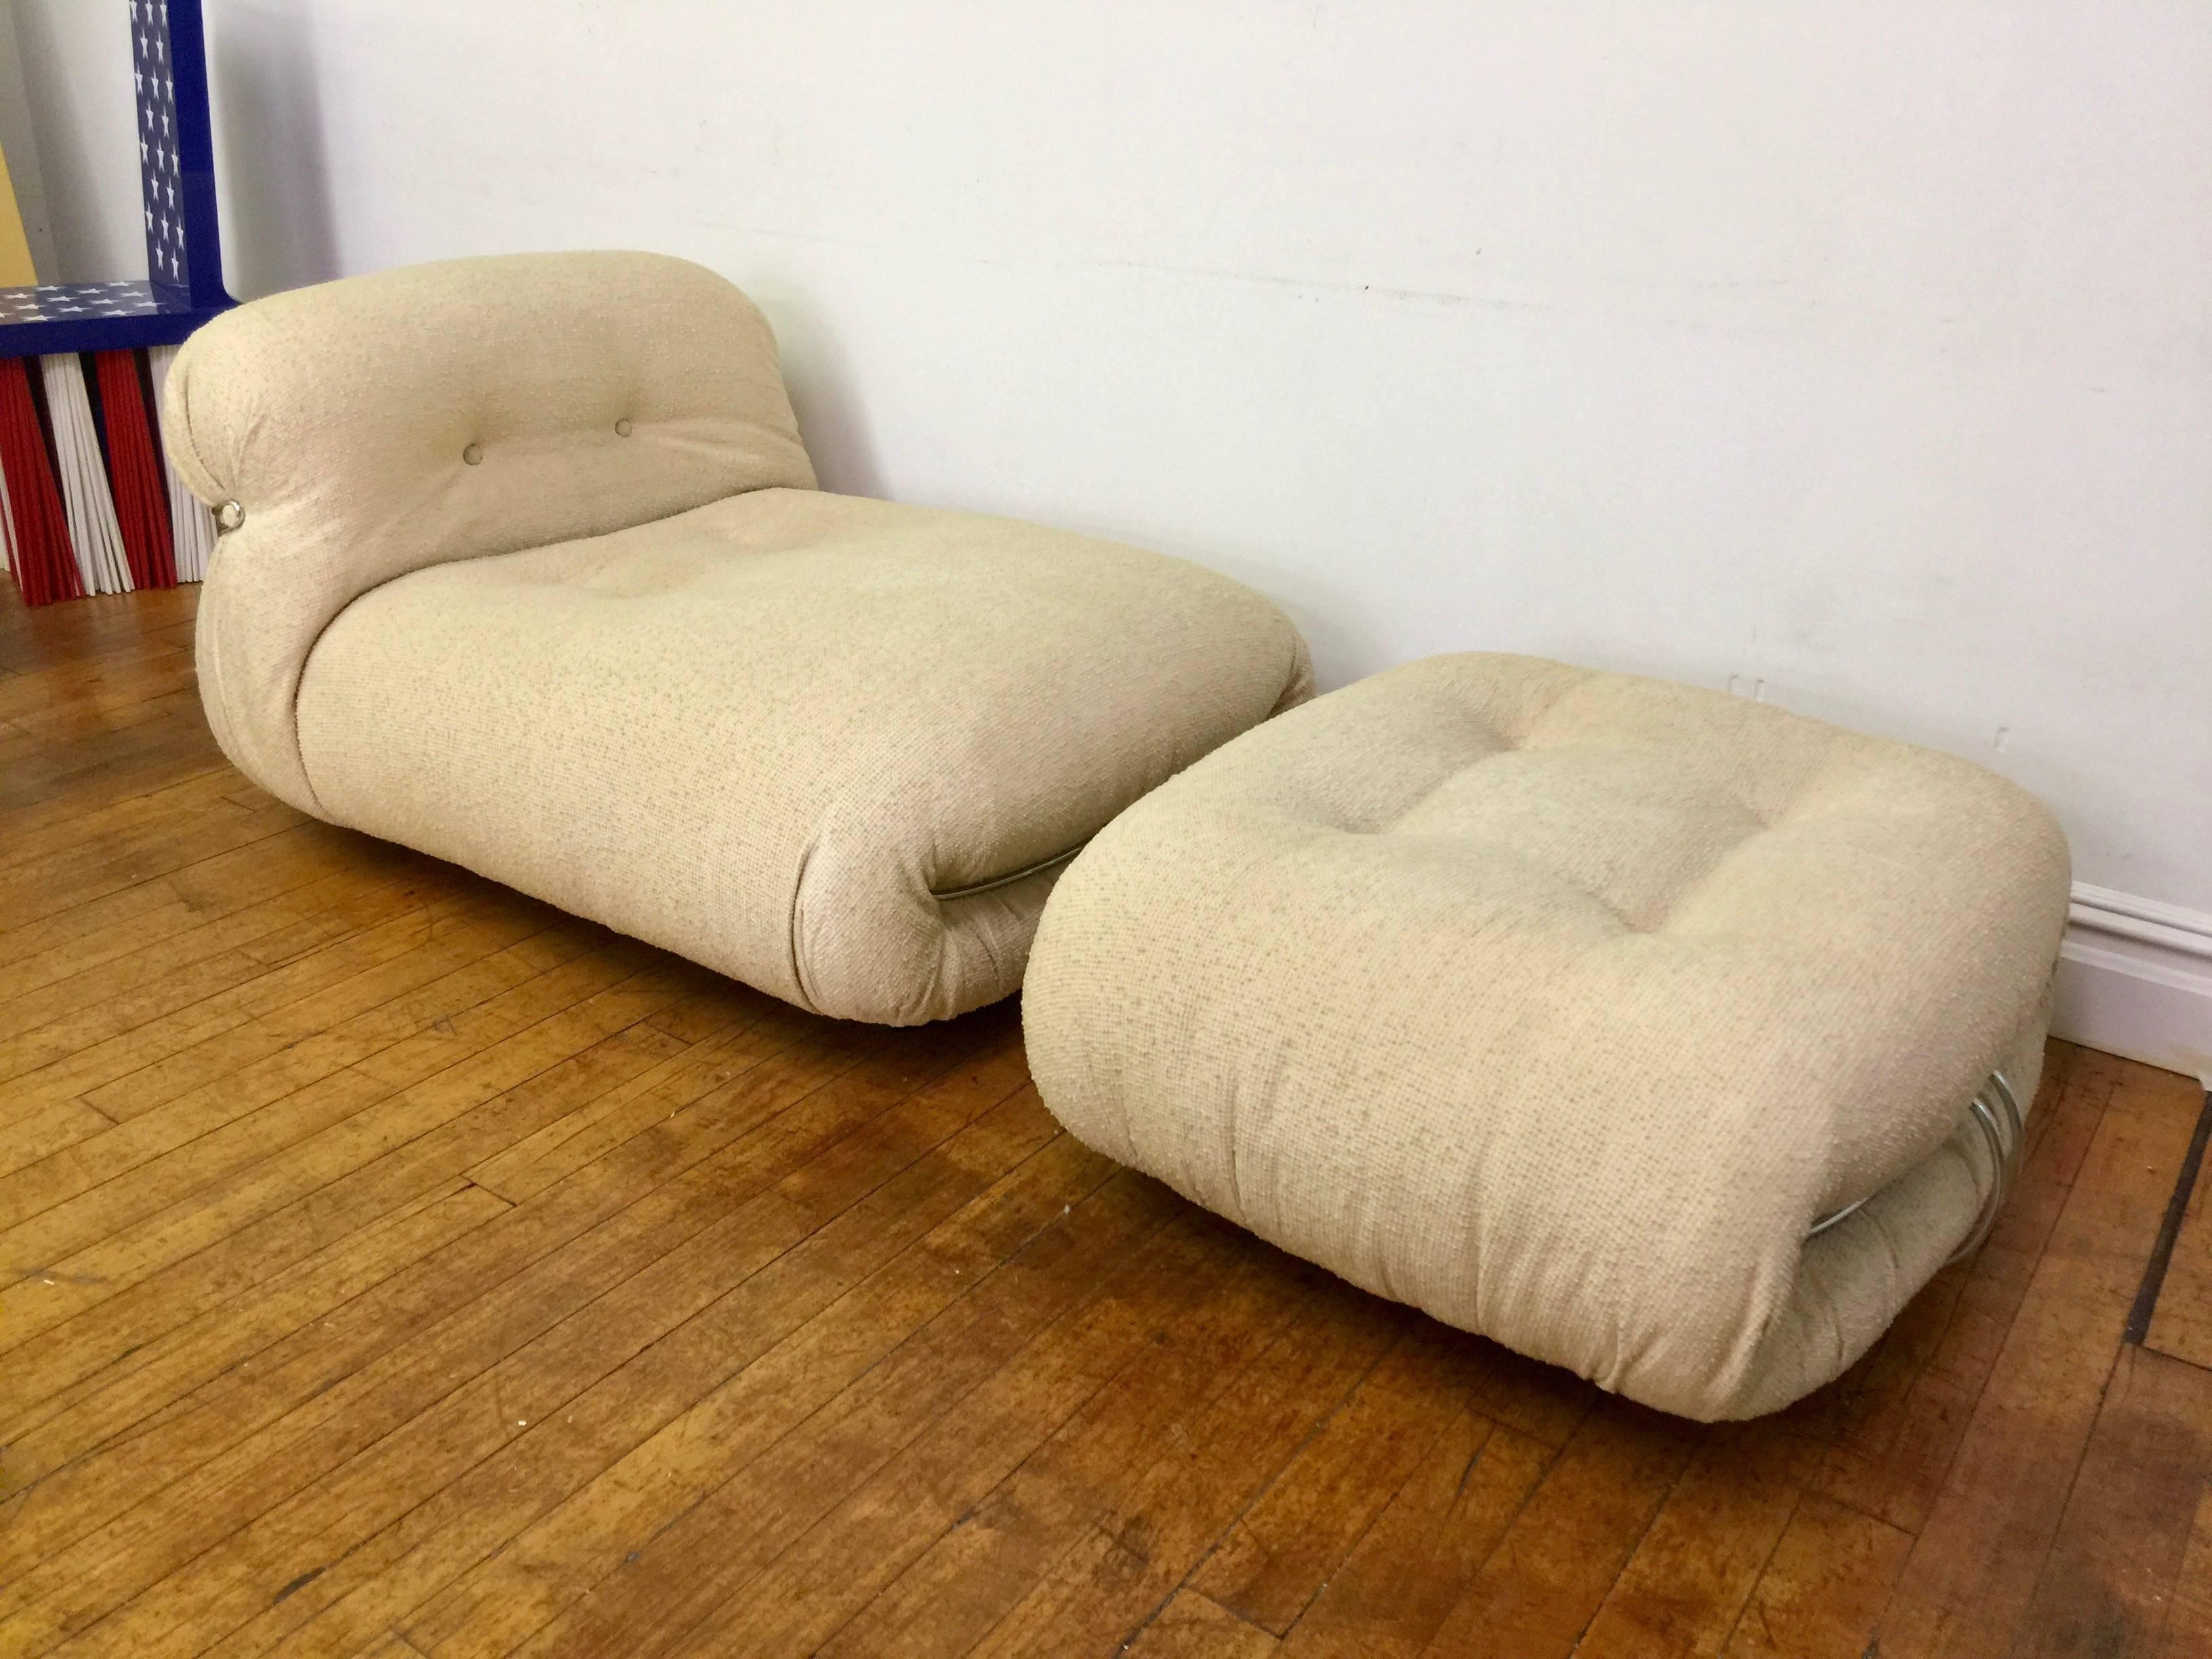 Afra & Tobia Scarpa Soriana Chaise Longue and Ottoman, manufactured by Cassina in the 1970s . Original thick off white / cream color fabric . 

Fabric has been dry cleaned and chrome structure polished.Cushion and foam has been checked and